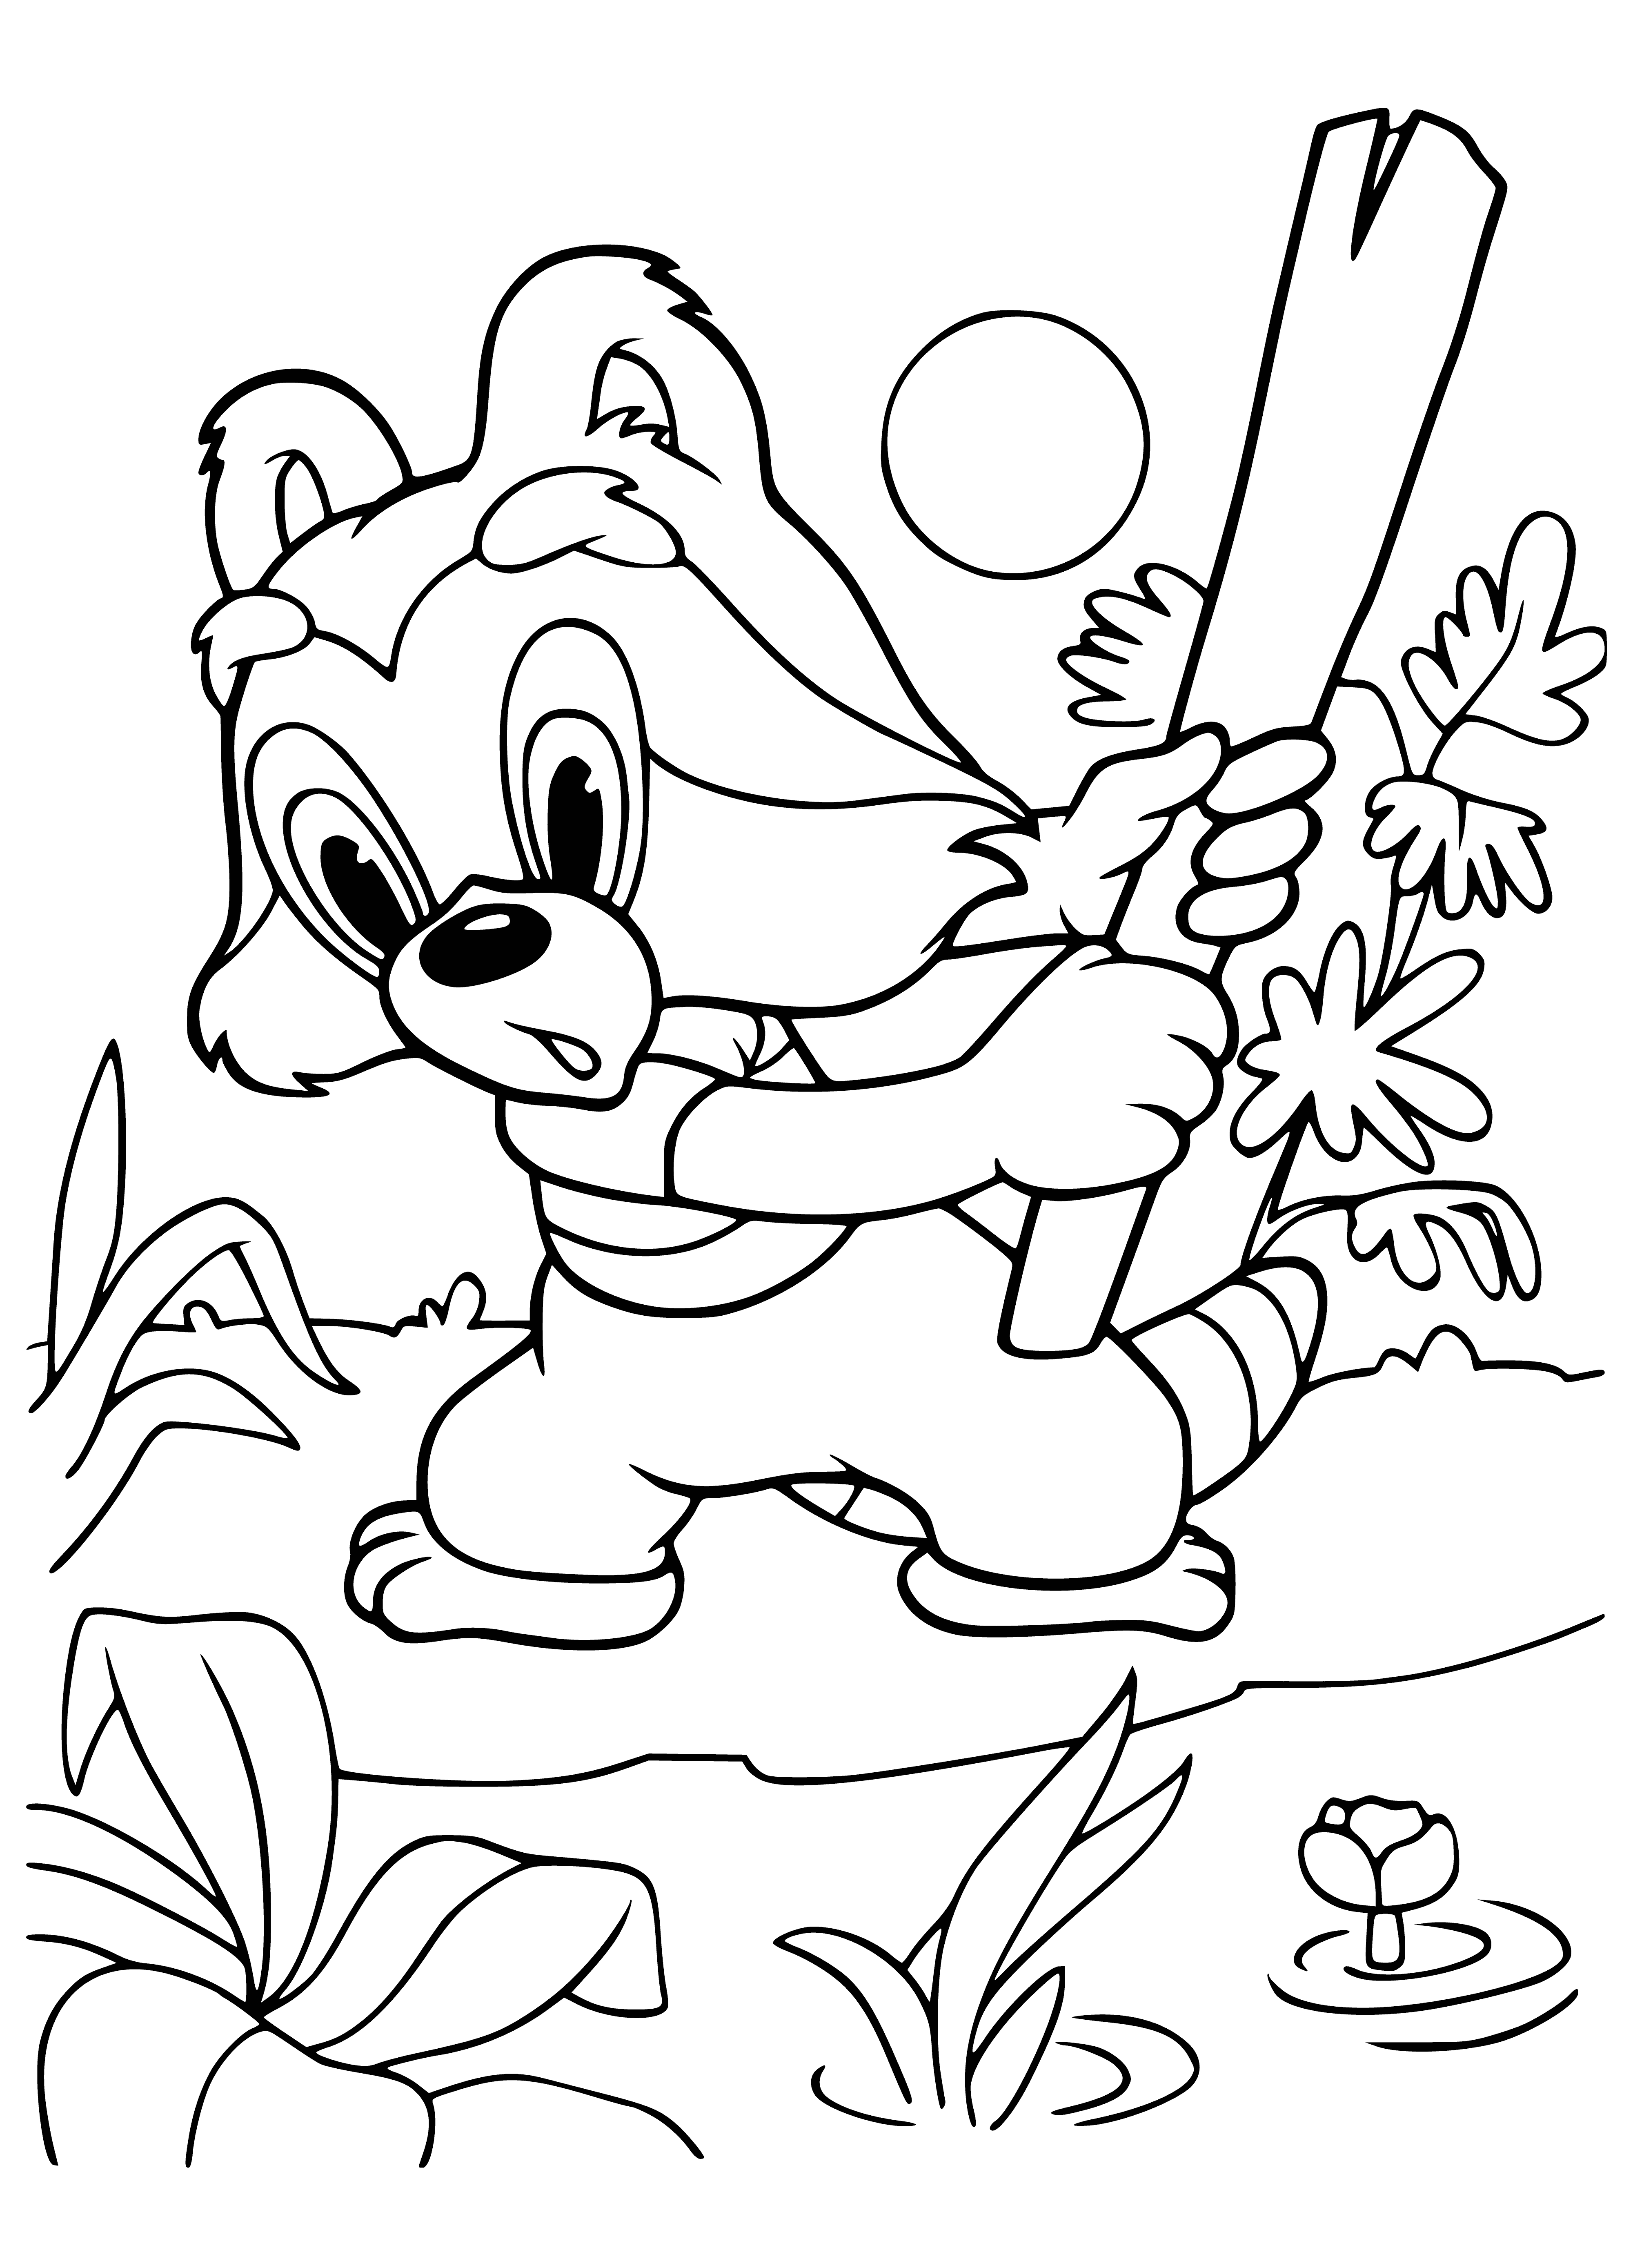 coloring page: A small raccoon stands tall, holding a stick in its paws. Gray fur with a black stripe down its back. #CuteAnimals